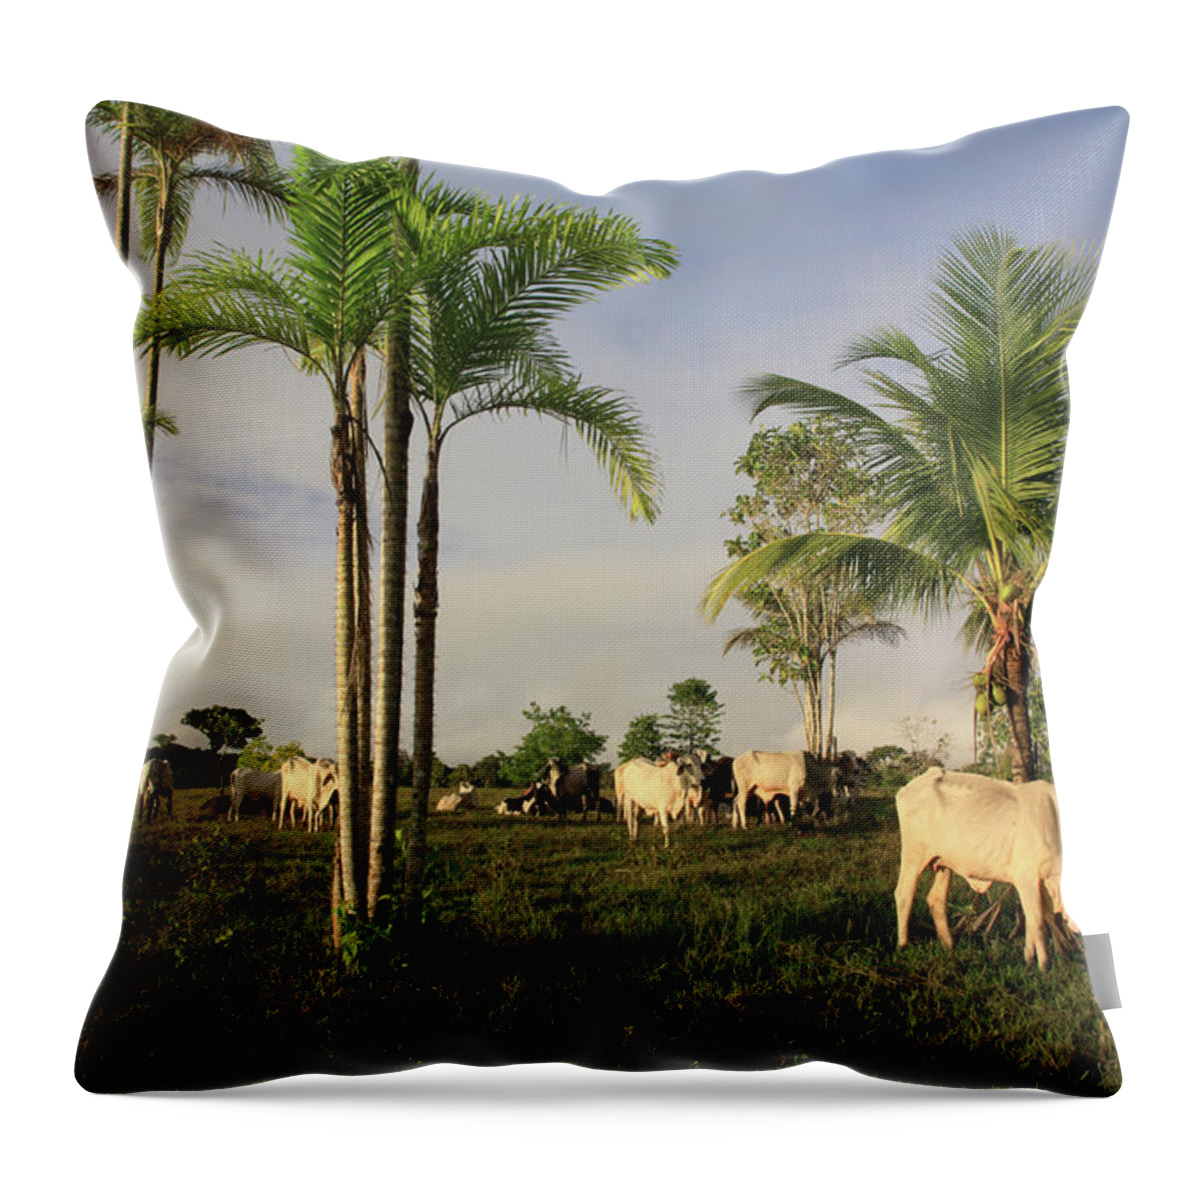 Tropical Rainforest Throw Pillow featuring the photograph Amazon Tropical Rainforest With Cattle by G01xm